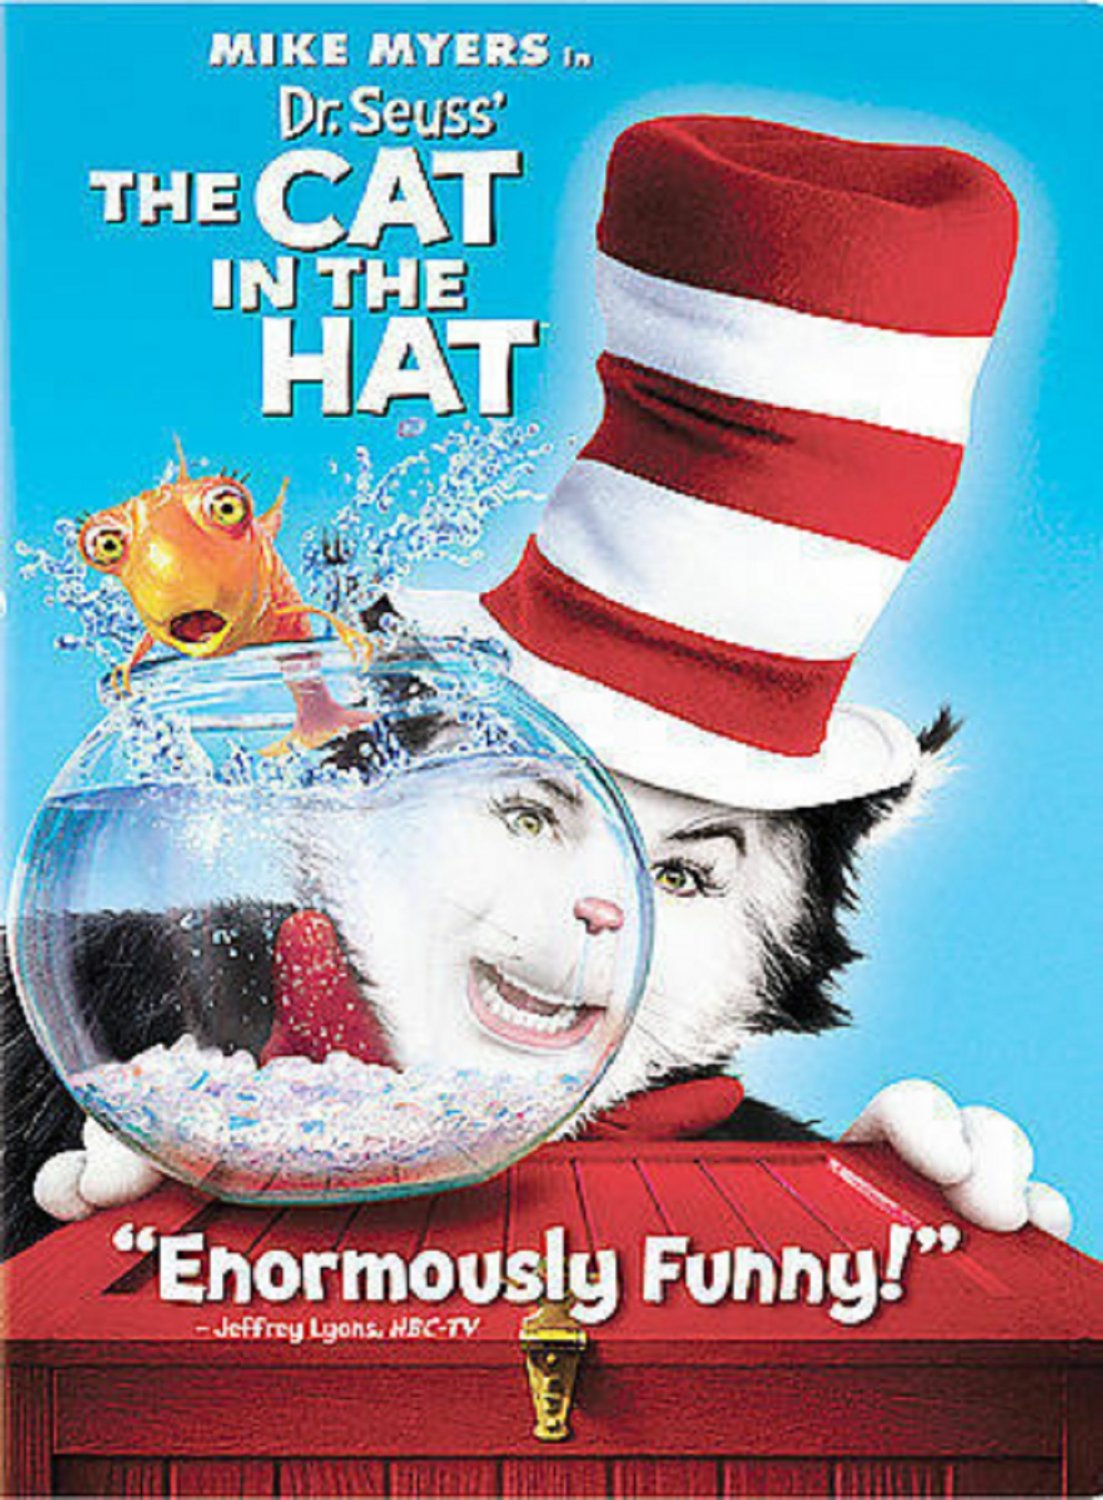 The Cat in the Hat Dr. Seuss (DVD, 2004, Widescreen Edition) LIKE NEW